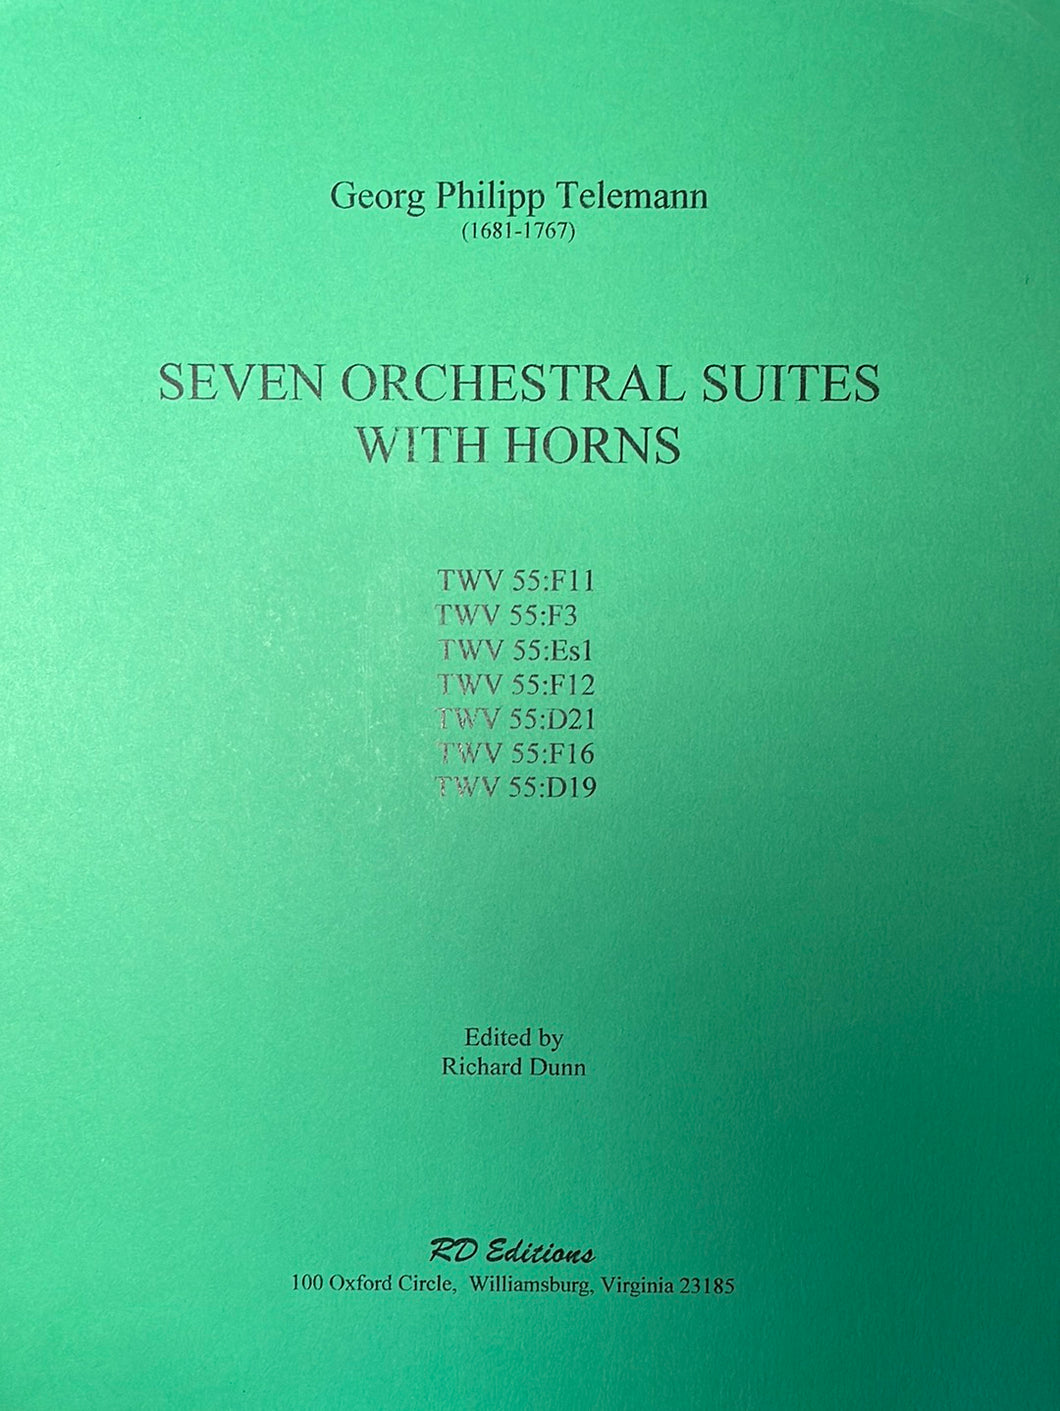 Telemann, G.P. (1681-1767): Seven Orchestral Suites With Horns